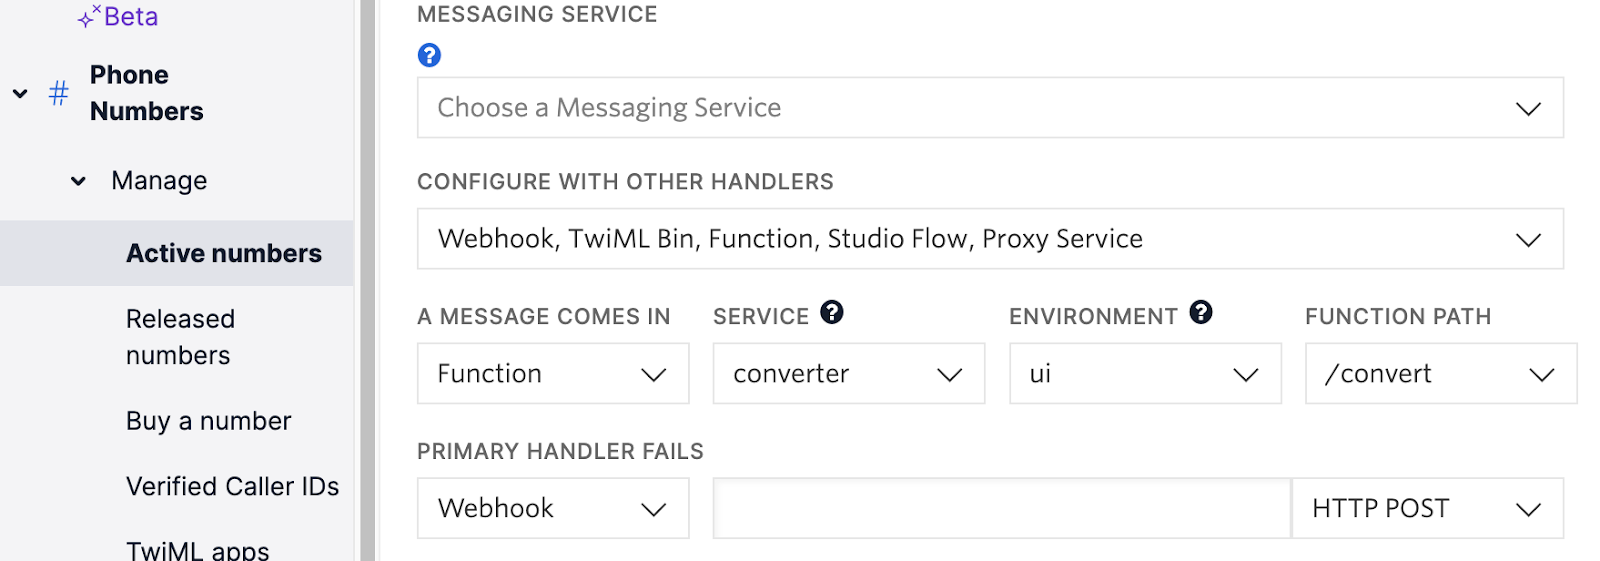 Connect your Twilio phone number to the function